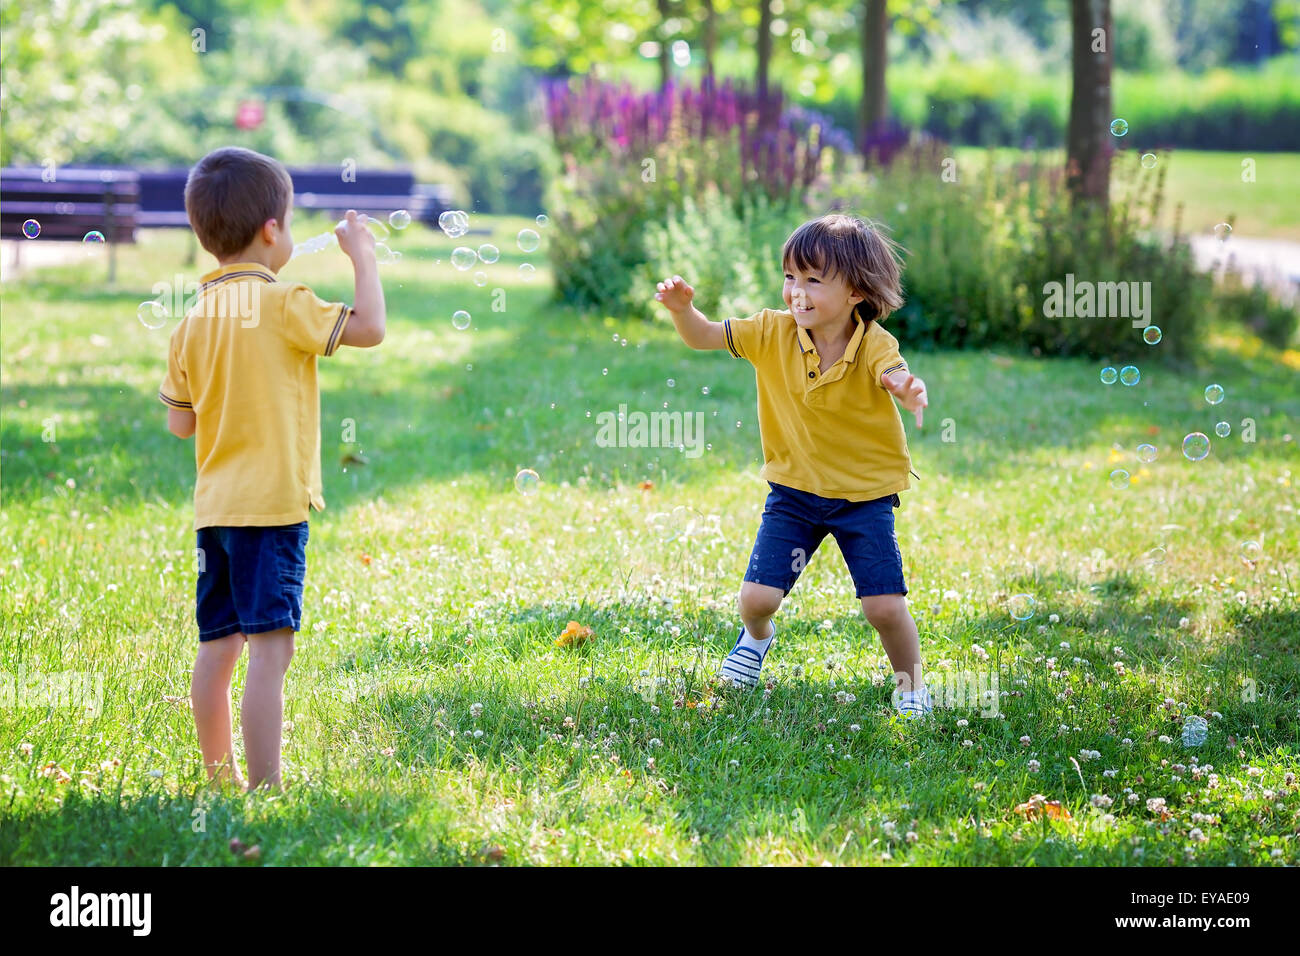 Two children in the park blowing and chasing soap bubbles and having fun, summer sunny day Stock Photo